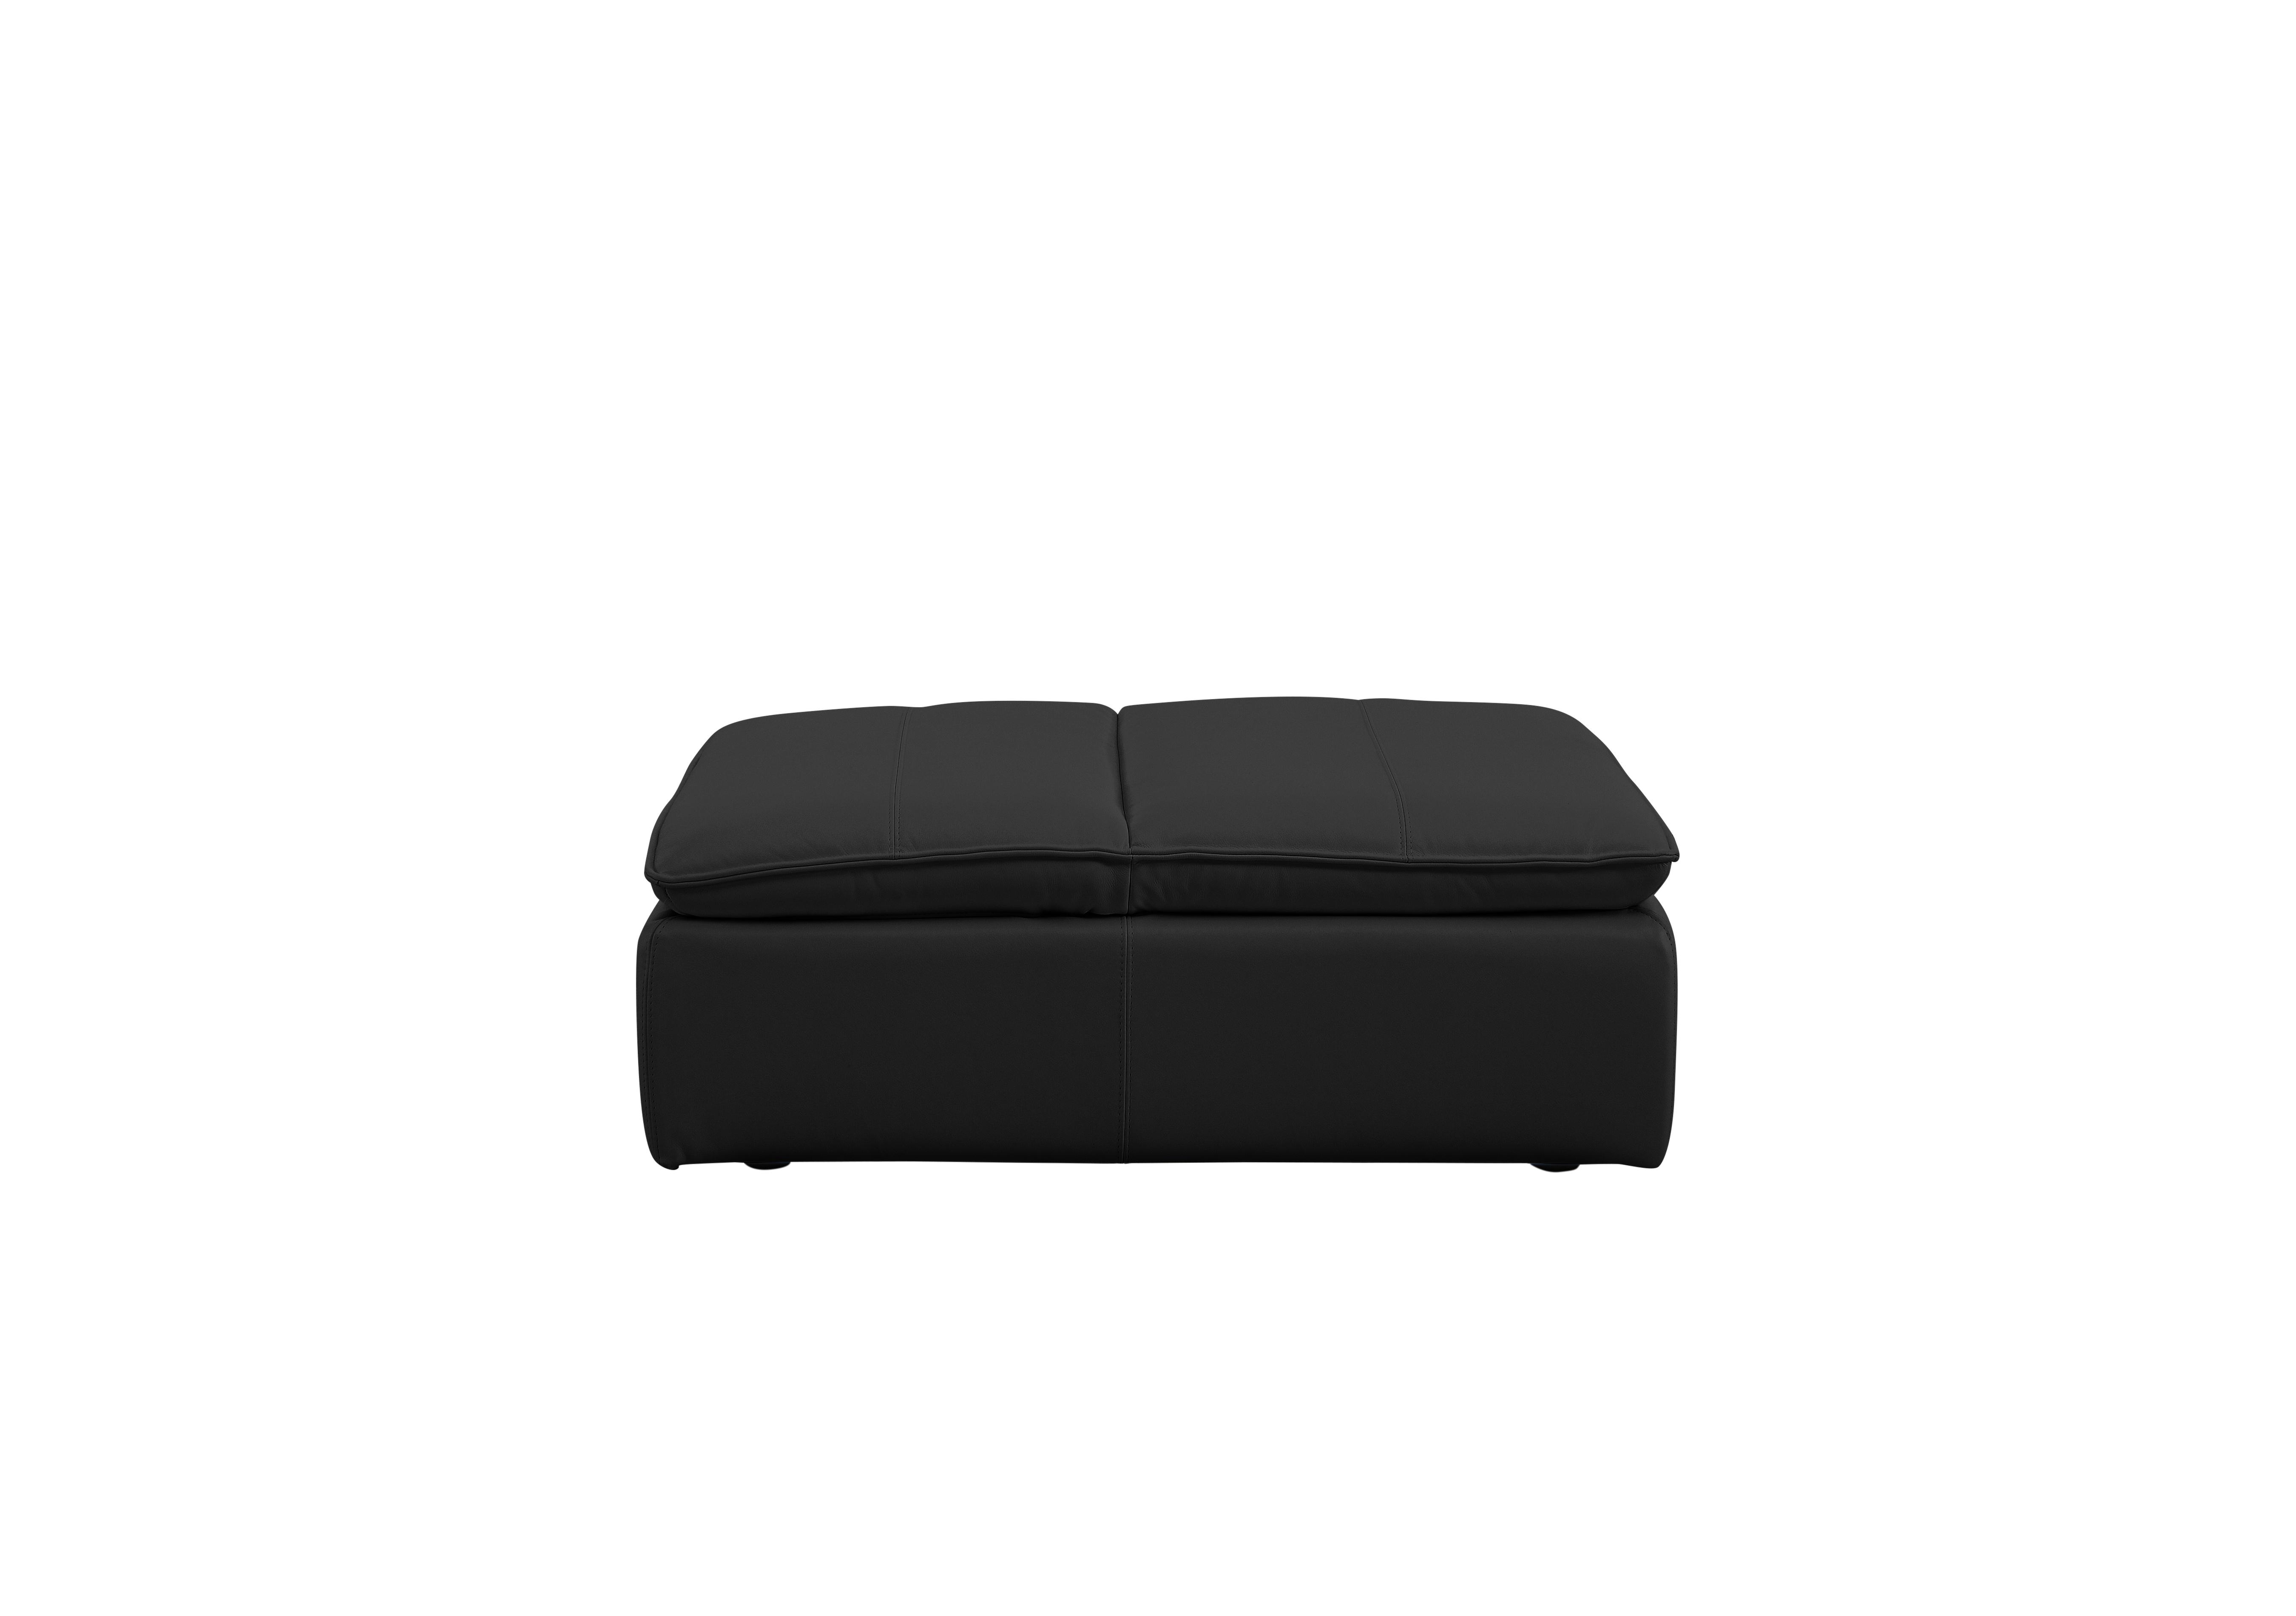 Starlight Express Leather Chair Footstool in Bv-3500 Classic Black on Furniture Village